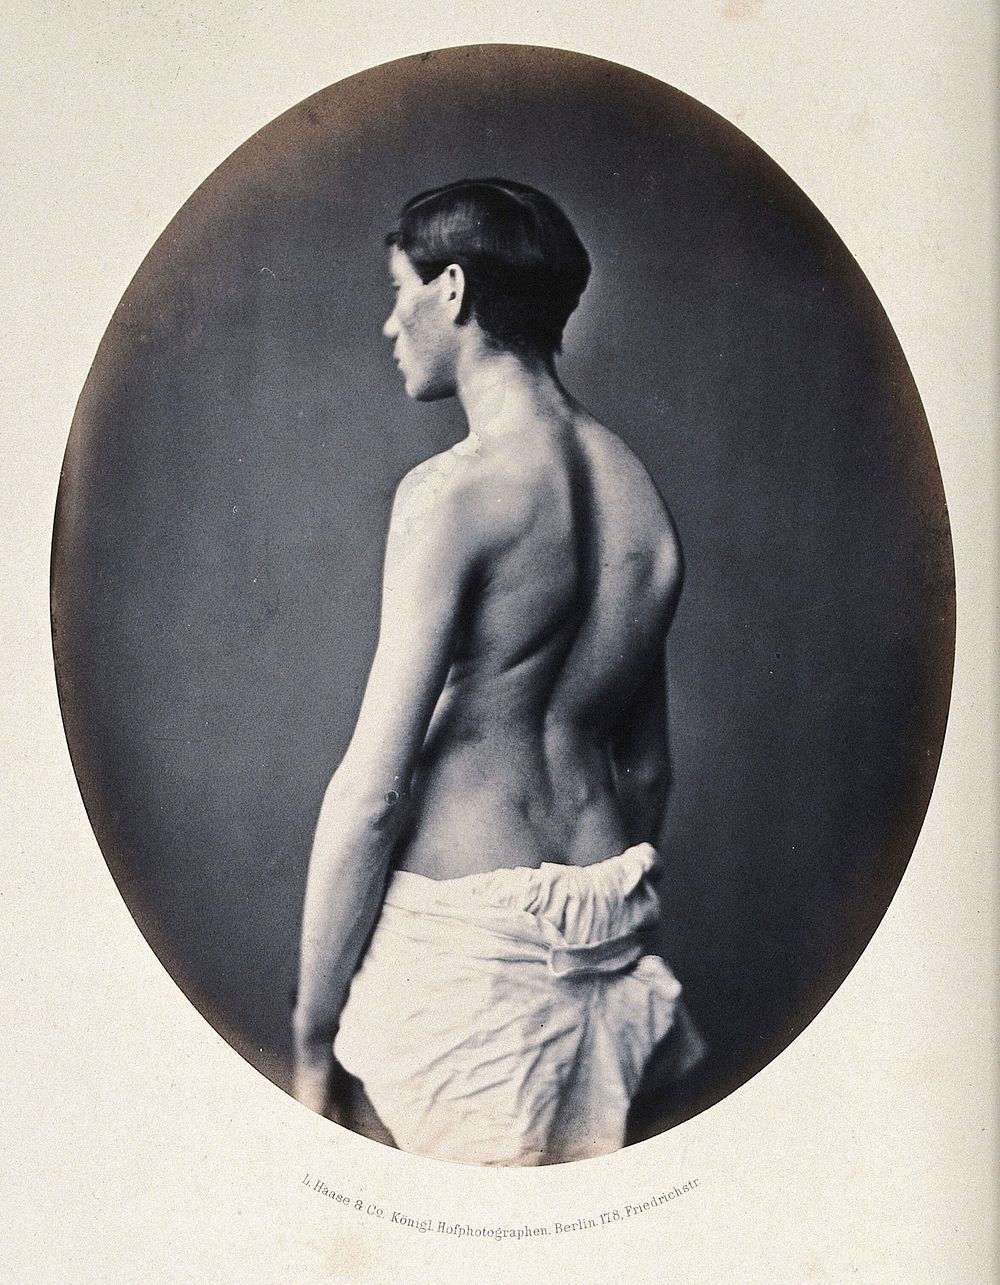 A standing young man, 3/4 length view, partially clothed; showing a deformity of the right shoulder blade. Photograph by L.…